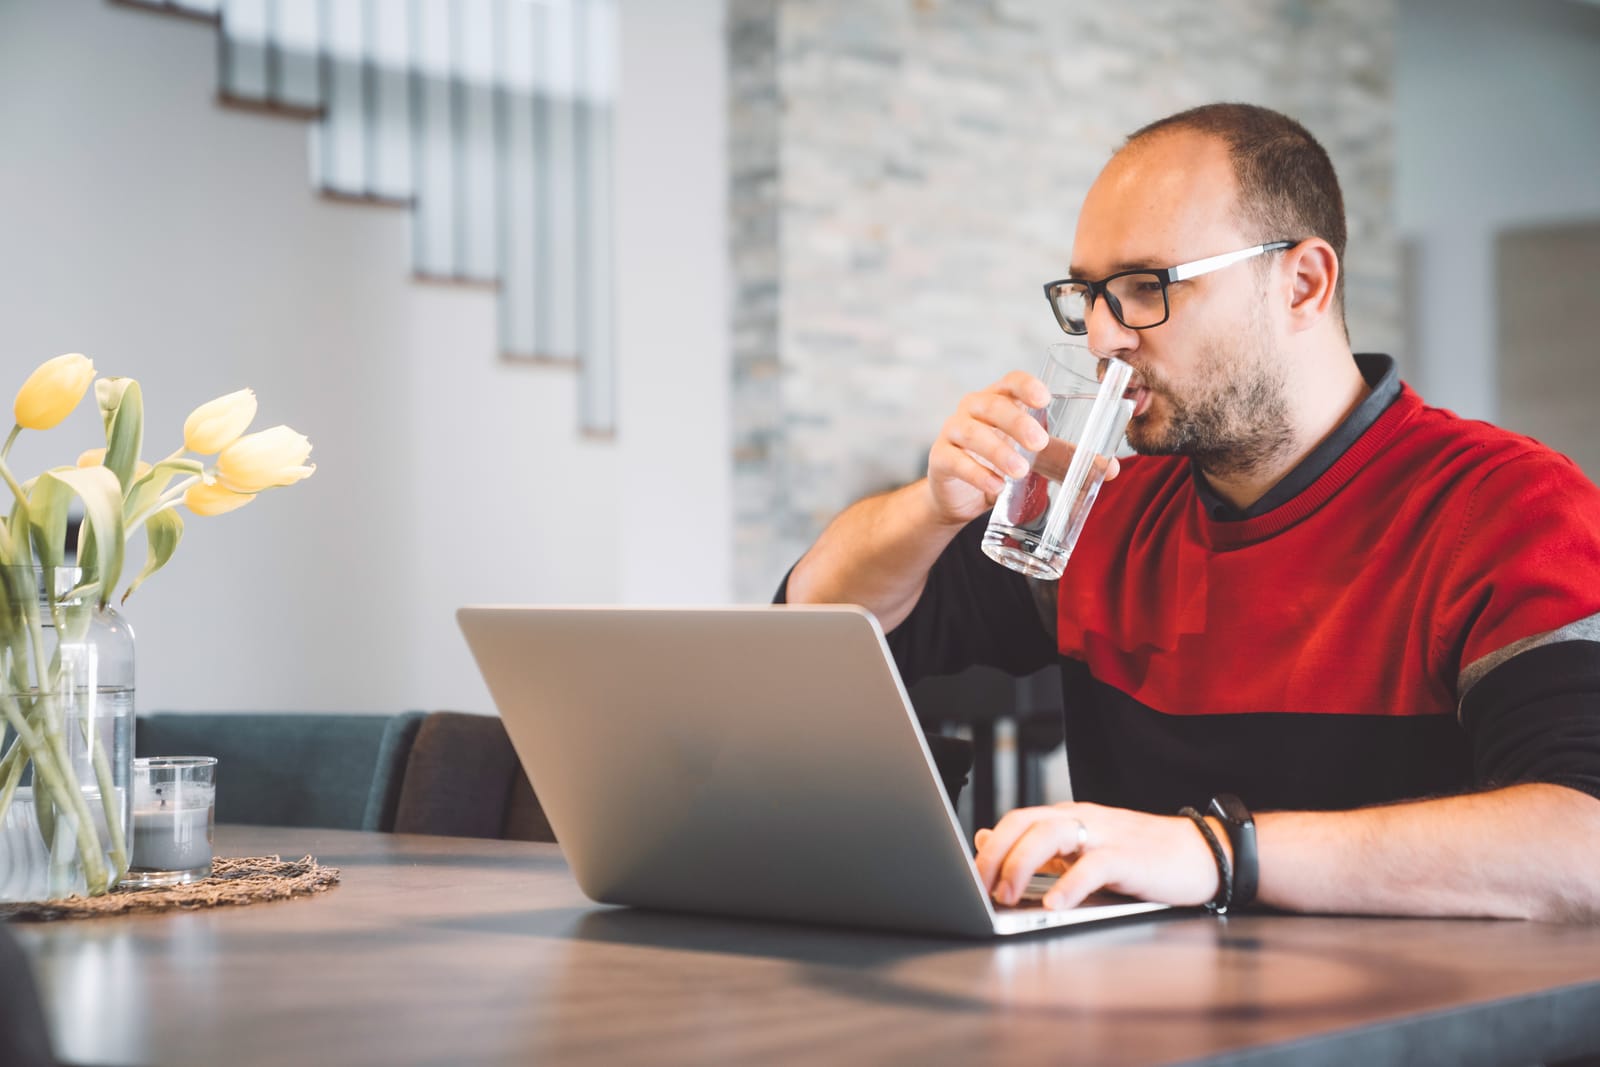 The Essential Guide to Staying Hydrated While Working from Home